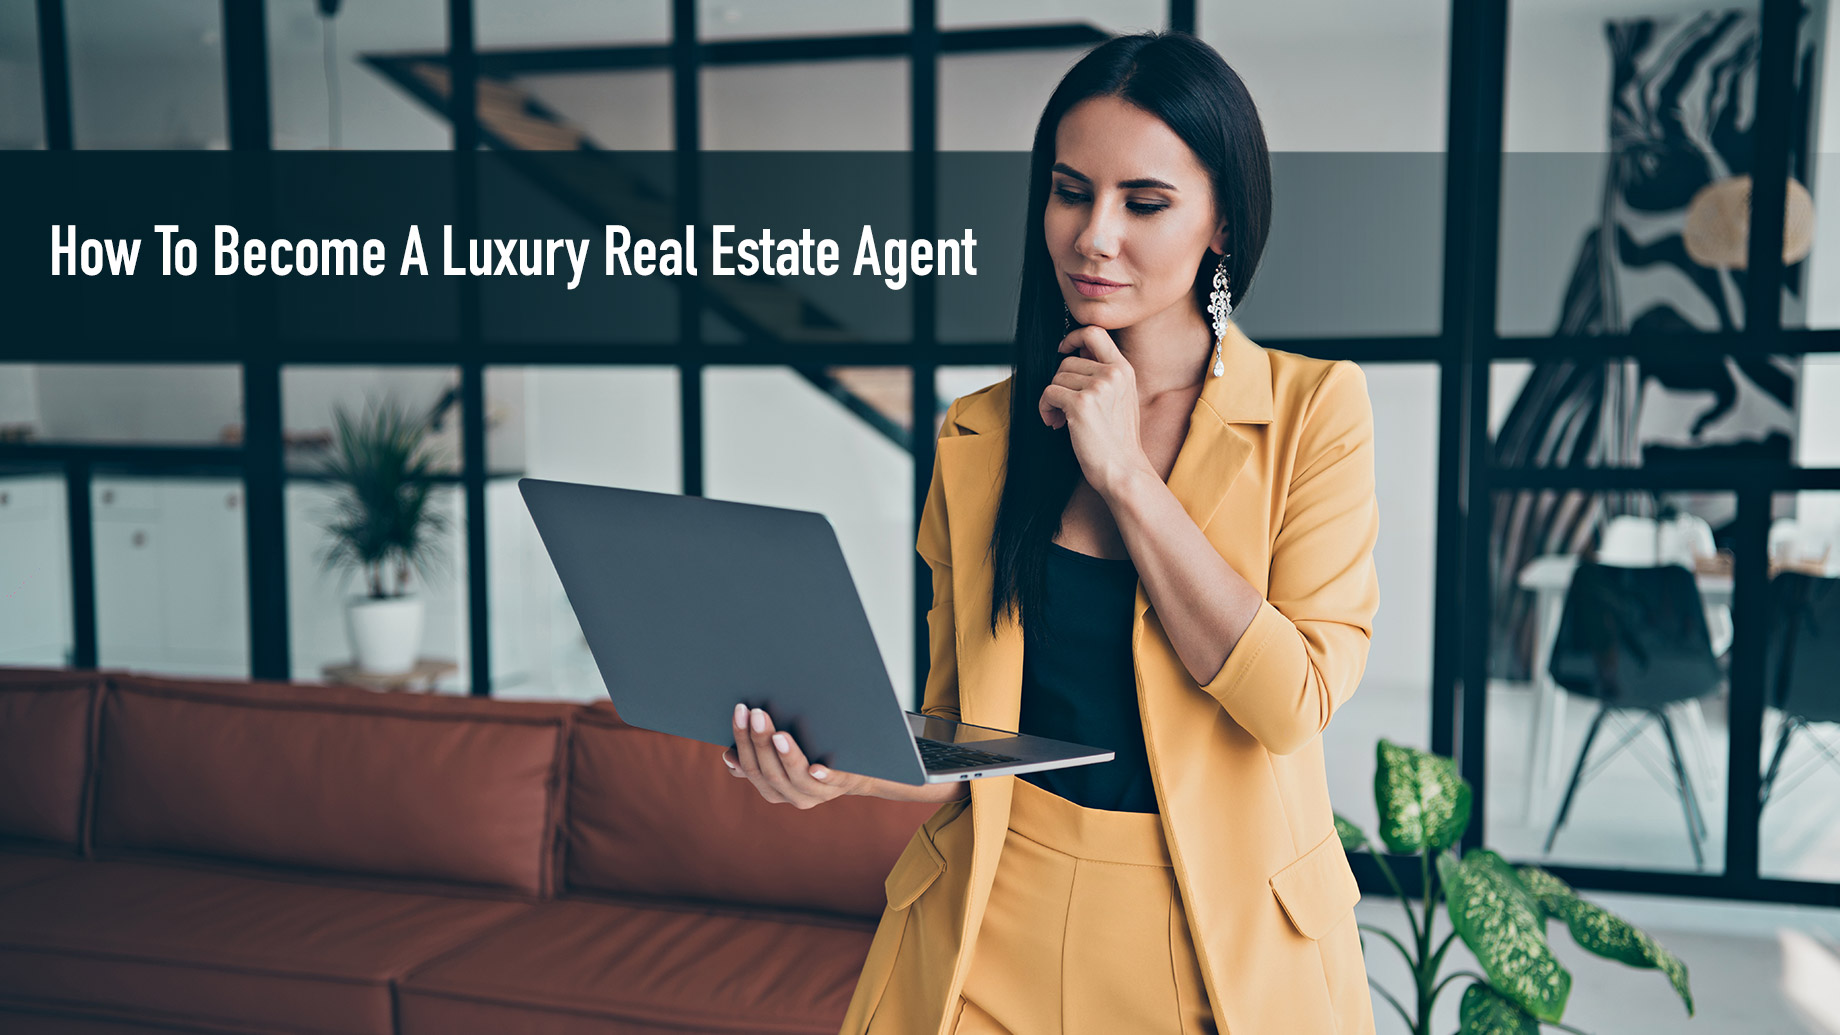 A Guide On How To Become A Luxury Real Estate Agent